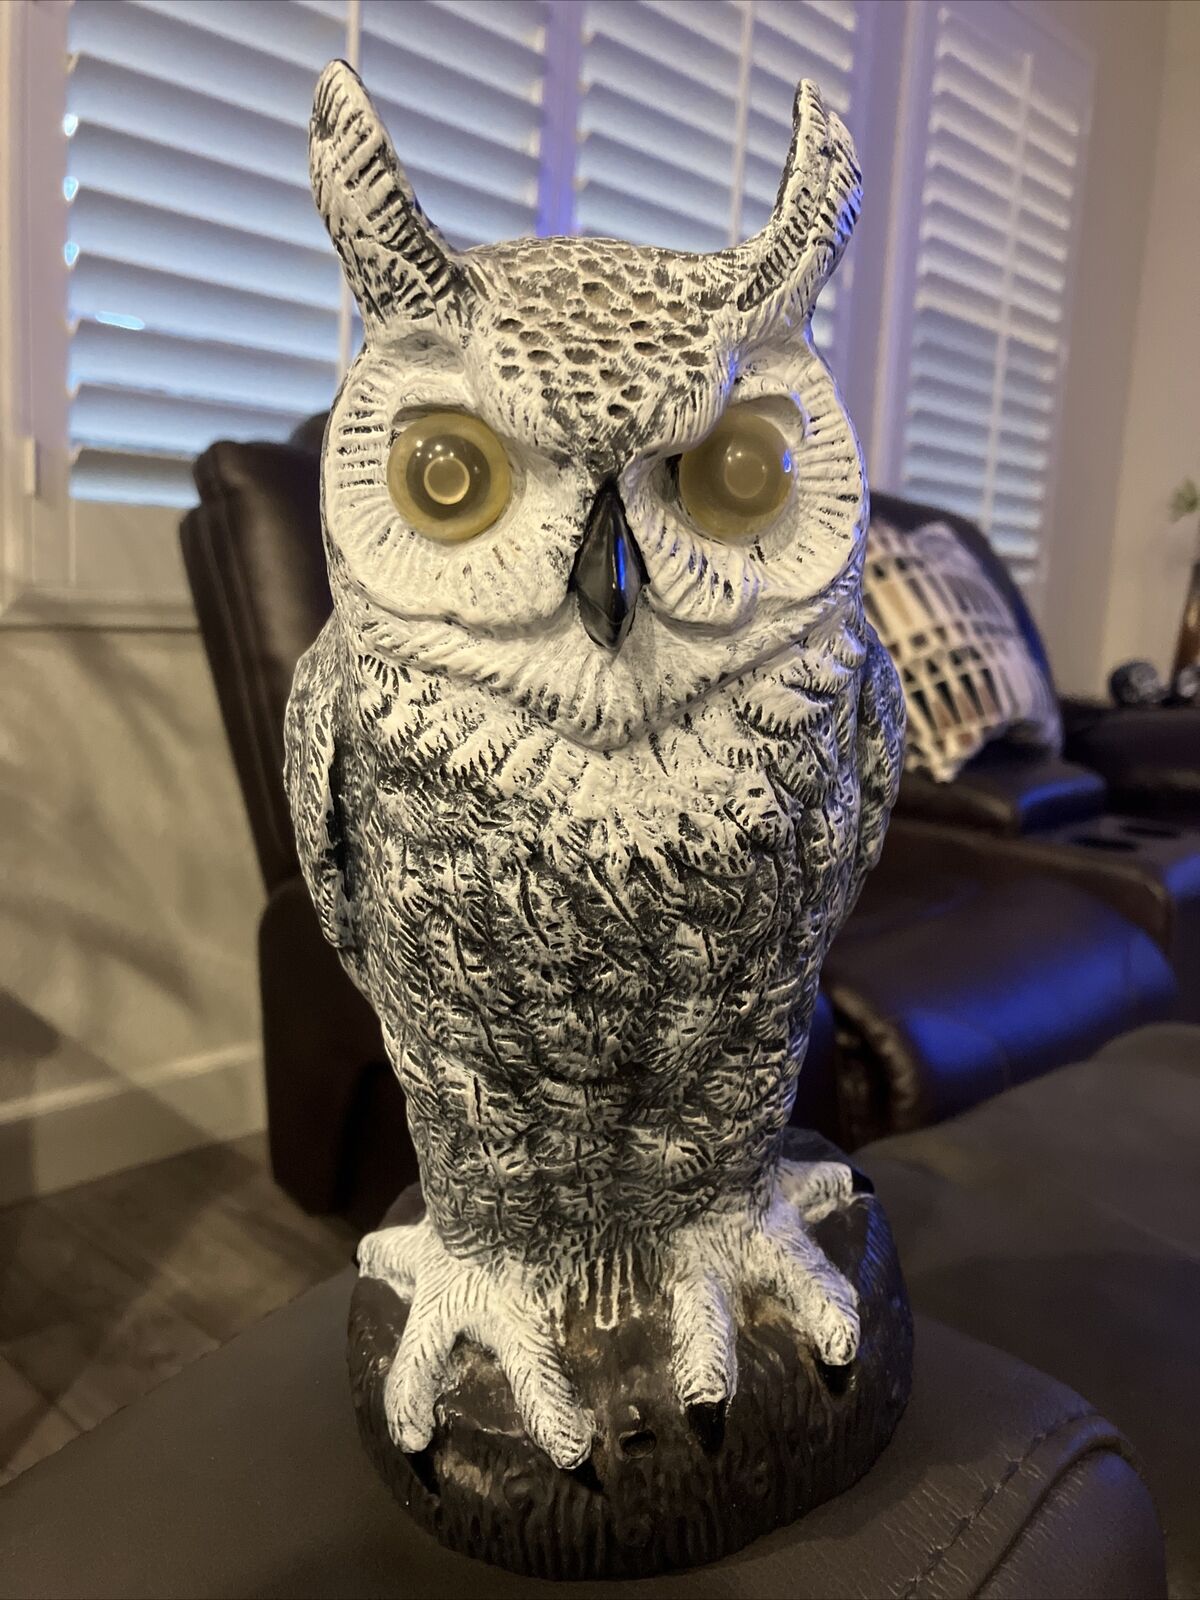 Vintage Harold Hoot Owl The motion activated hooting owl with eyes that light